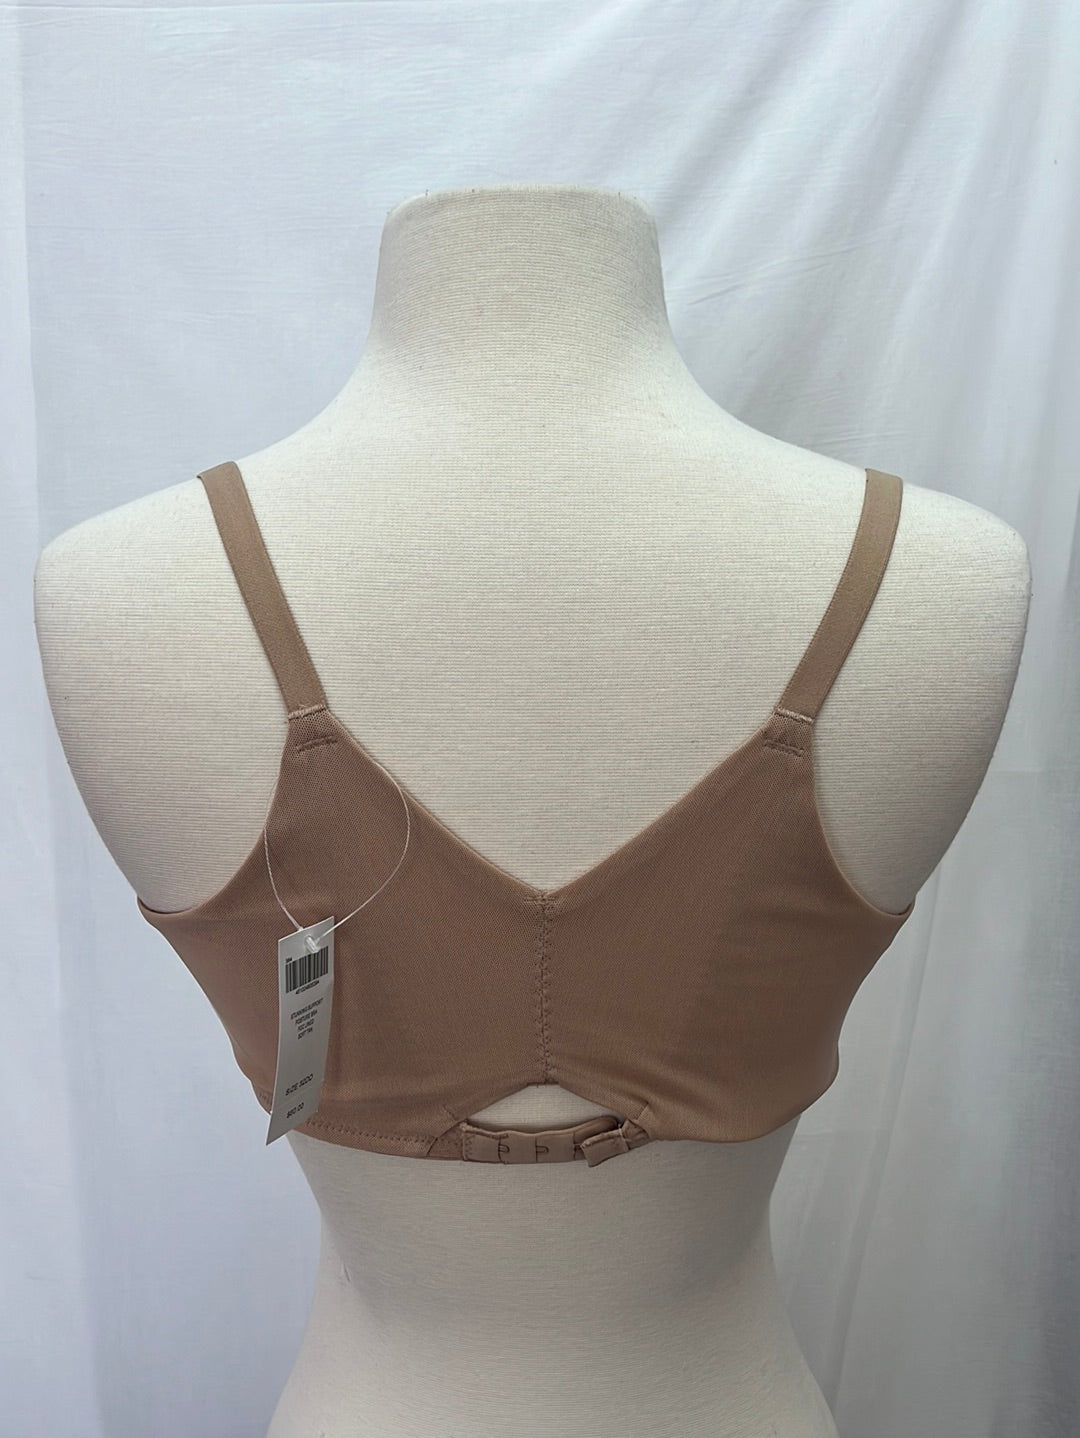 Soma Stunning Support Bra 34DDD Coverage Underwire Beige RN 79984 Lace - RD  Content